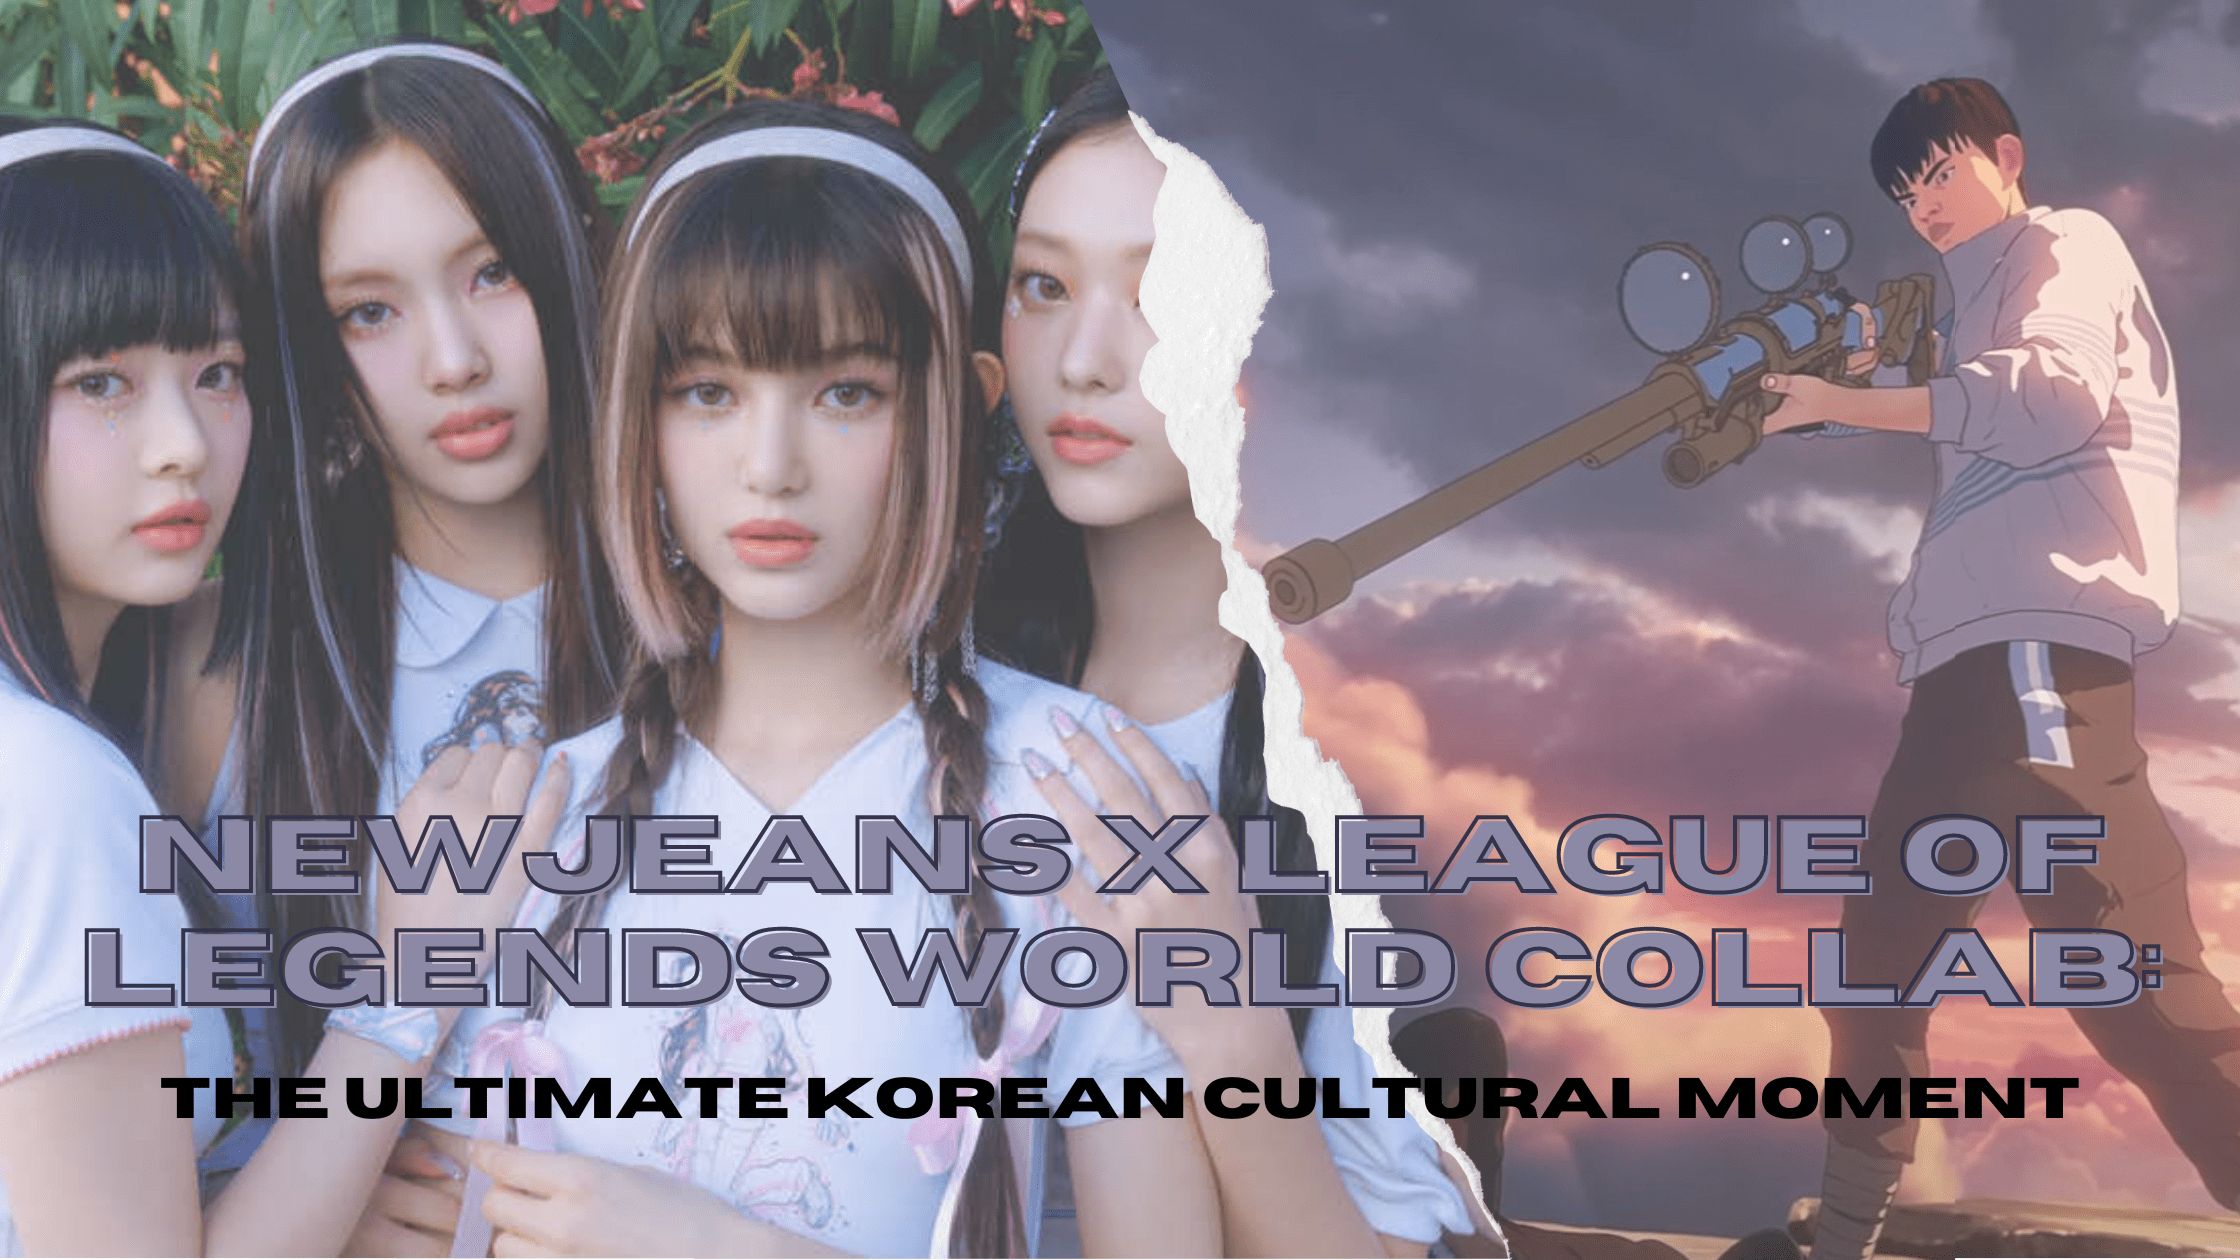 NewJeans x League of Legends World Collab: The Ultimate Korean Cultural  Moment